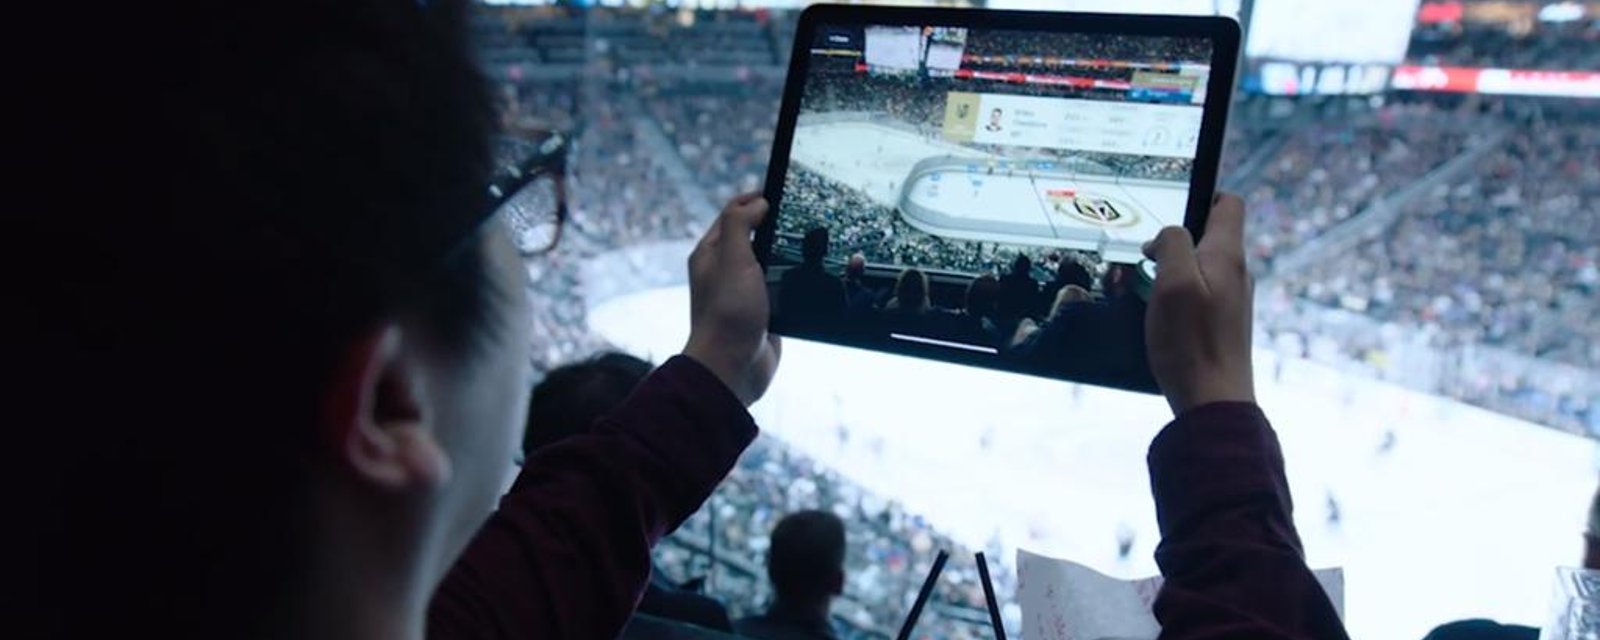 NHL announces new puck and player tracking technology for upcoming season 